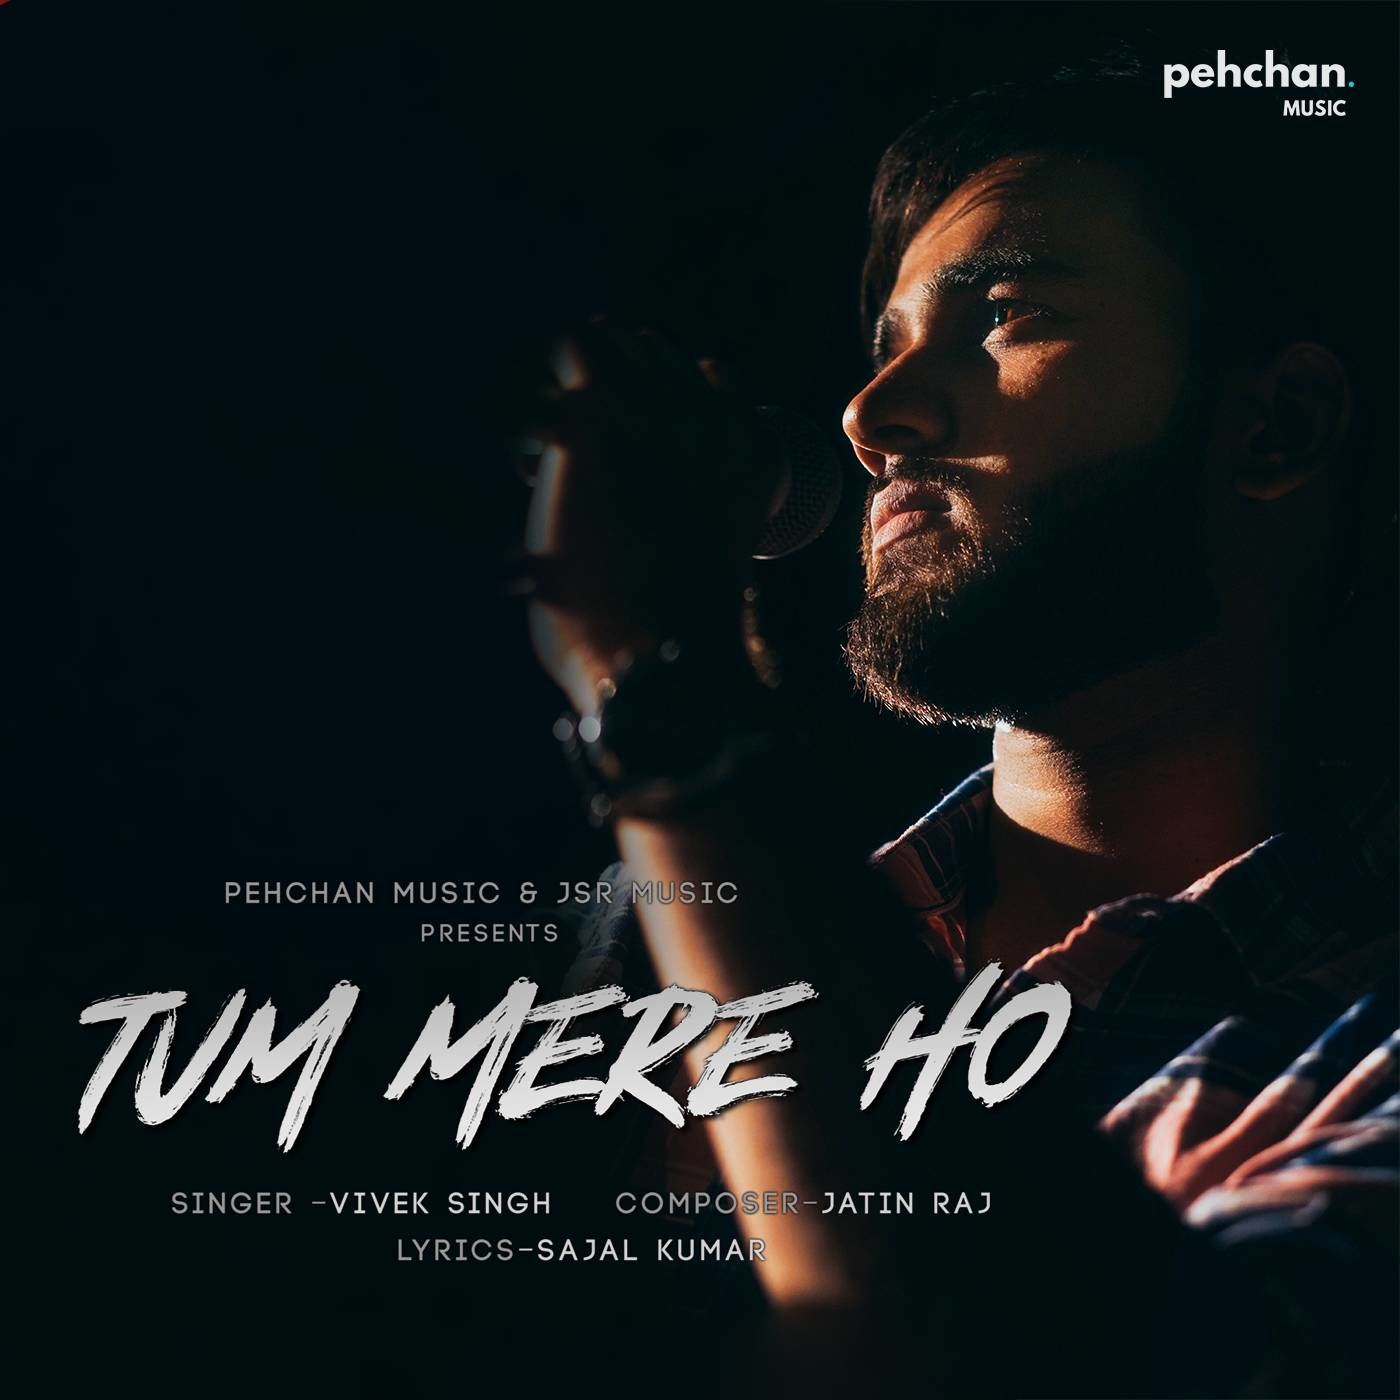 Tum Mere Ho Video Song, Tum Mere Ho Full Video Song in HD Quality on